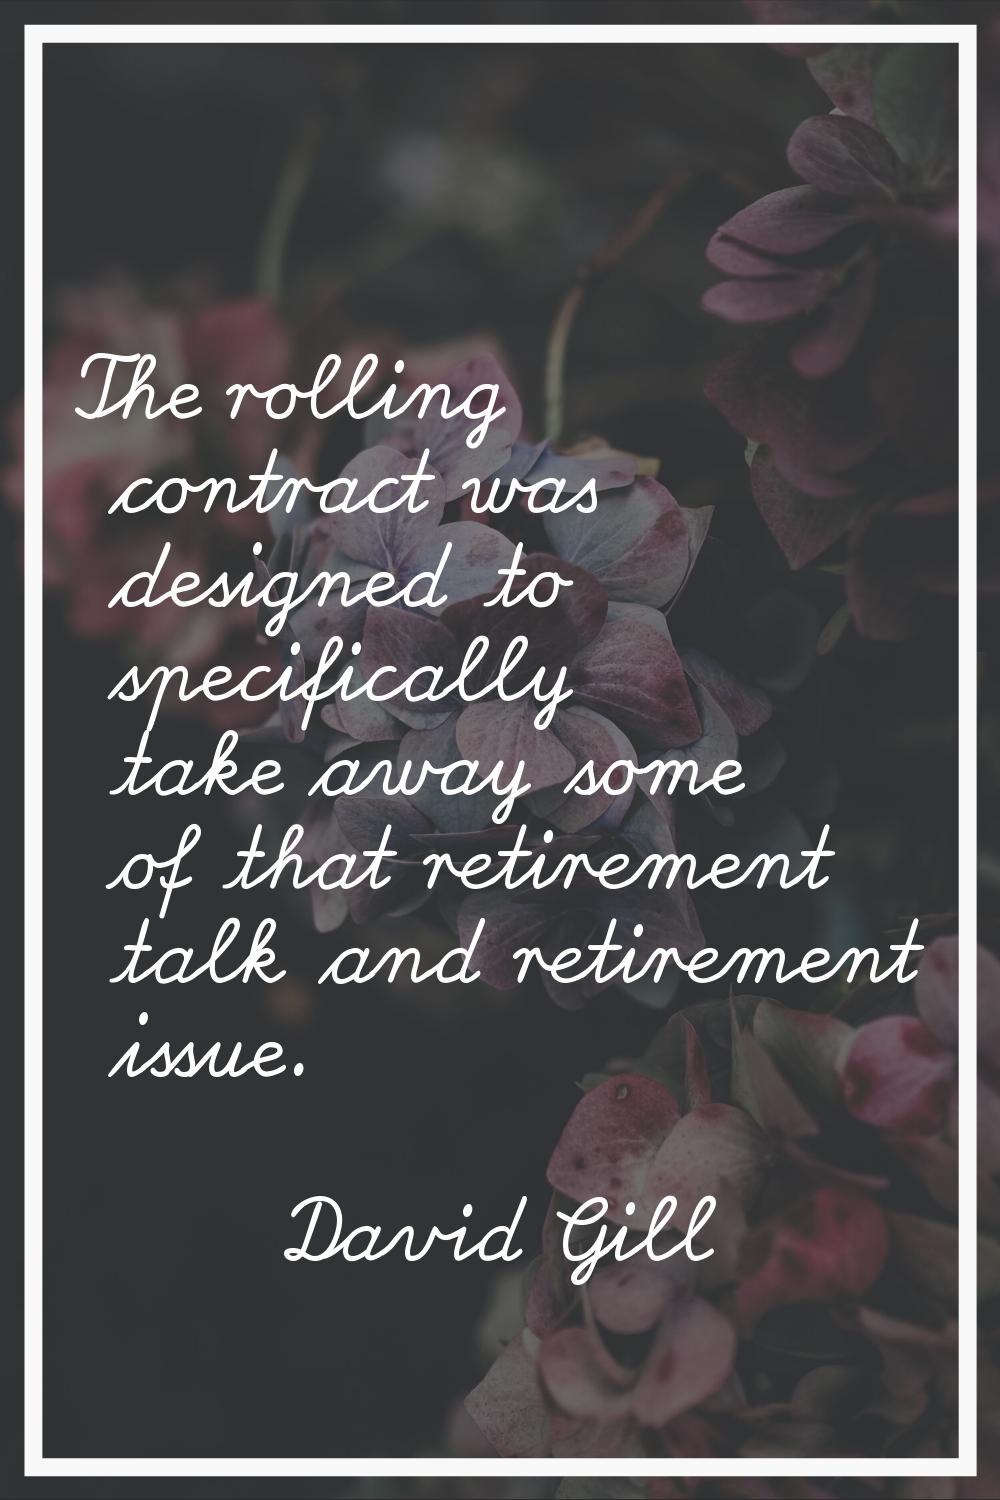 The rolling contract was designed to specifically take away some of that retirement talk and retire